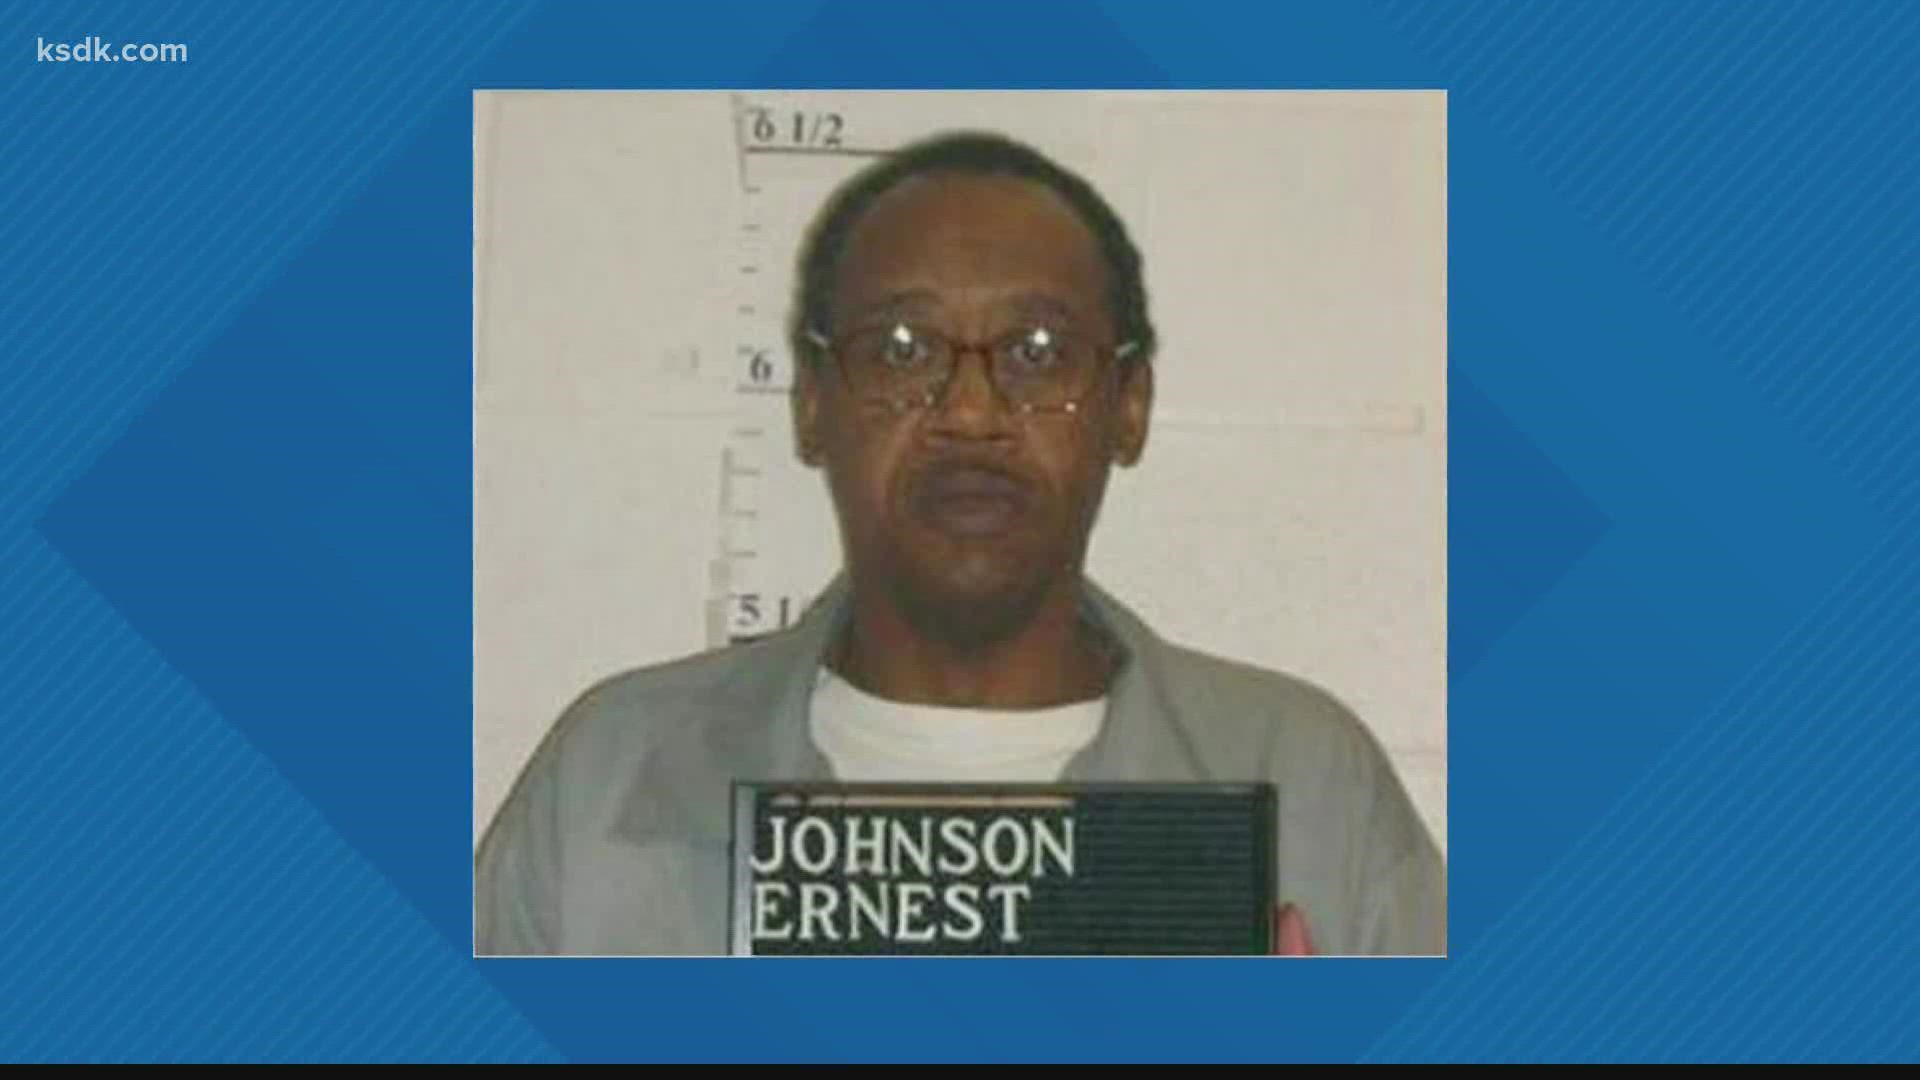 "No one ever said that Ernest was innocent or that he needed to be let out of prison,” said Smith.